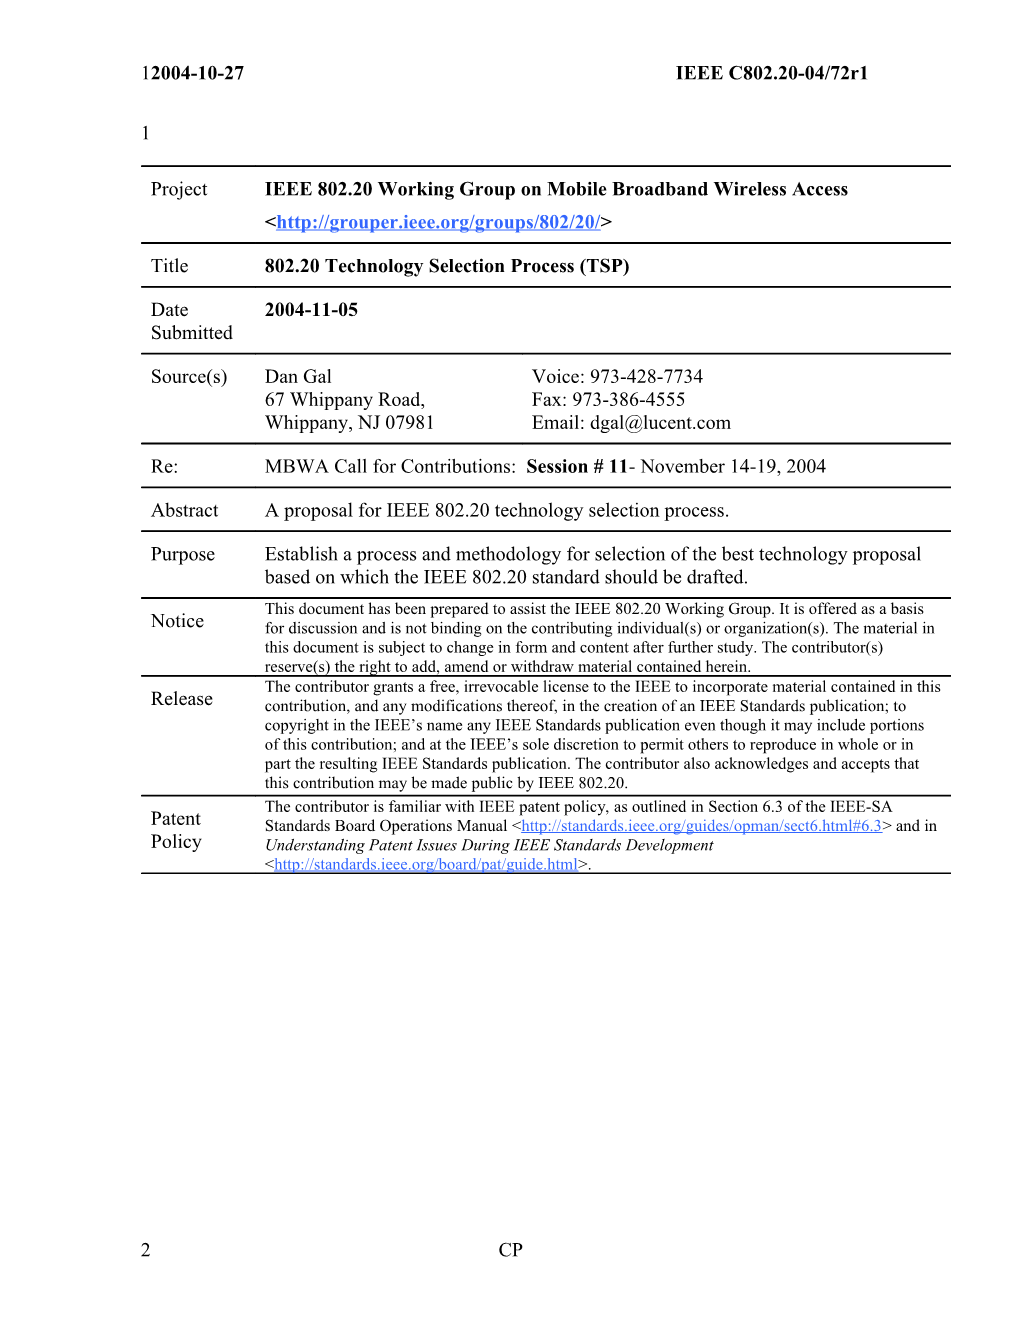 This Document Is a Proposal for the IEEE 802.20 Technology Selection Procedure (TSP)